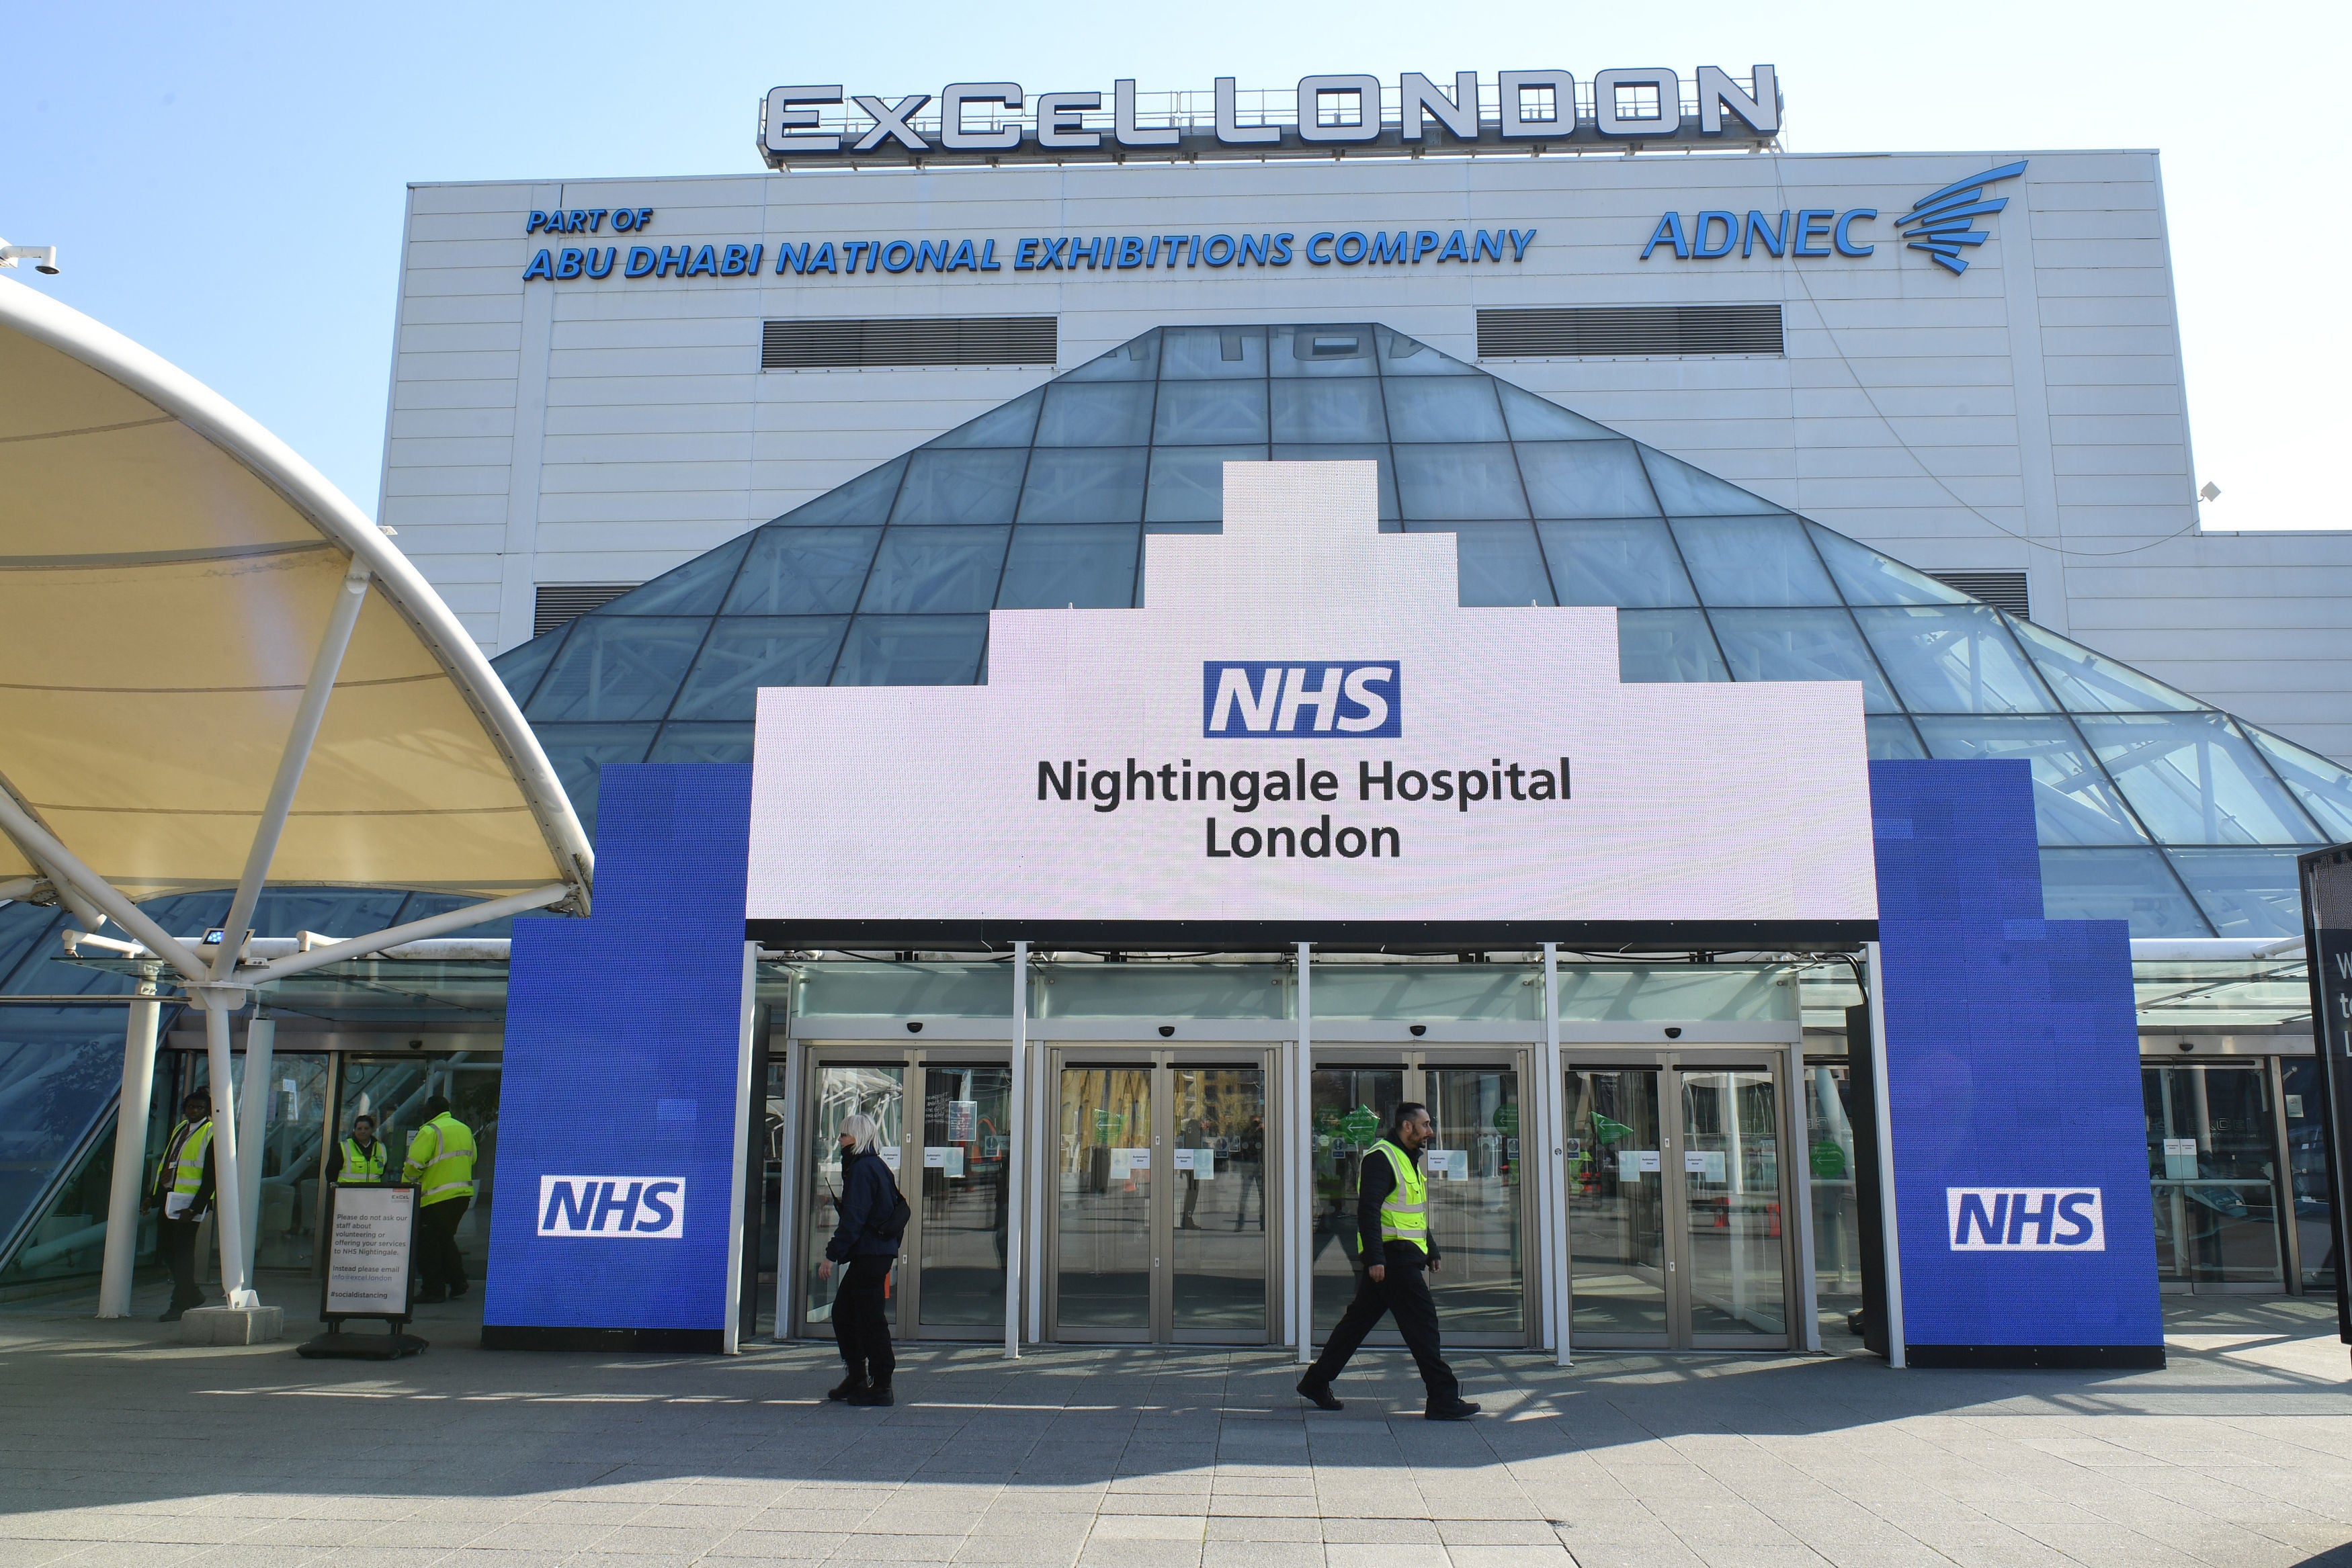 London’s Nightingale Hospital at the Excel centre in east London